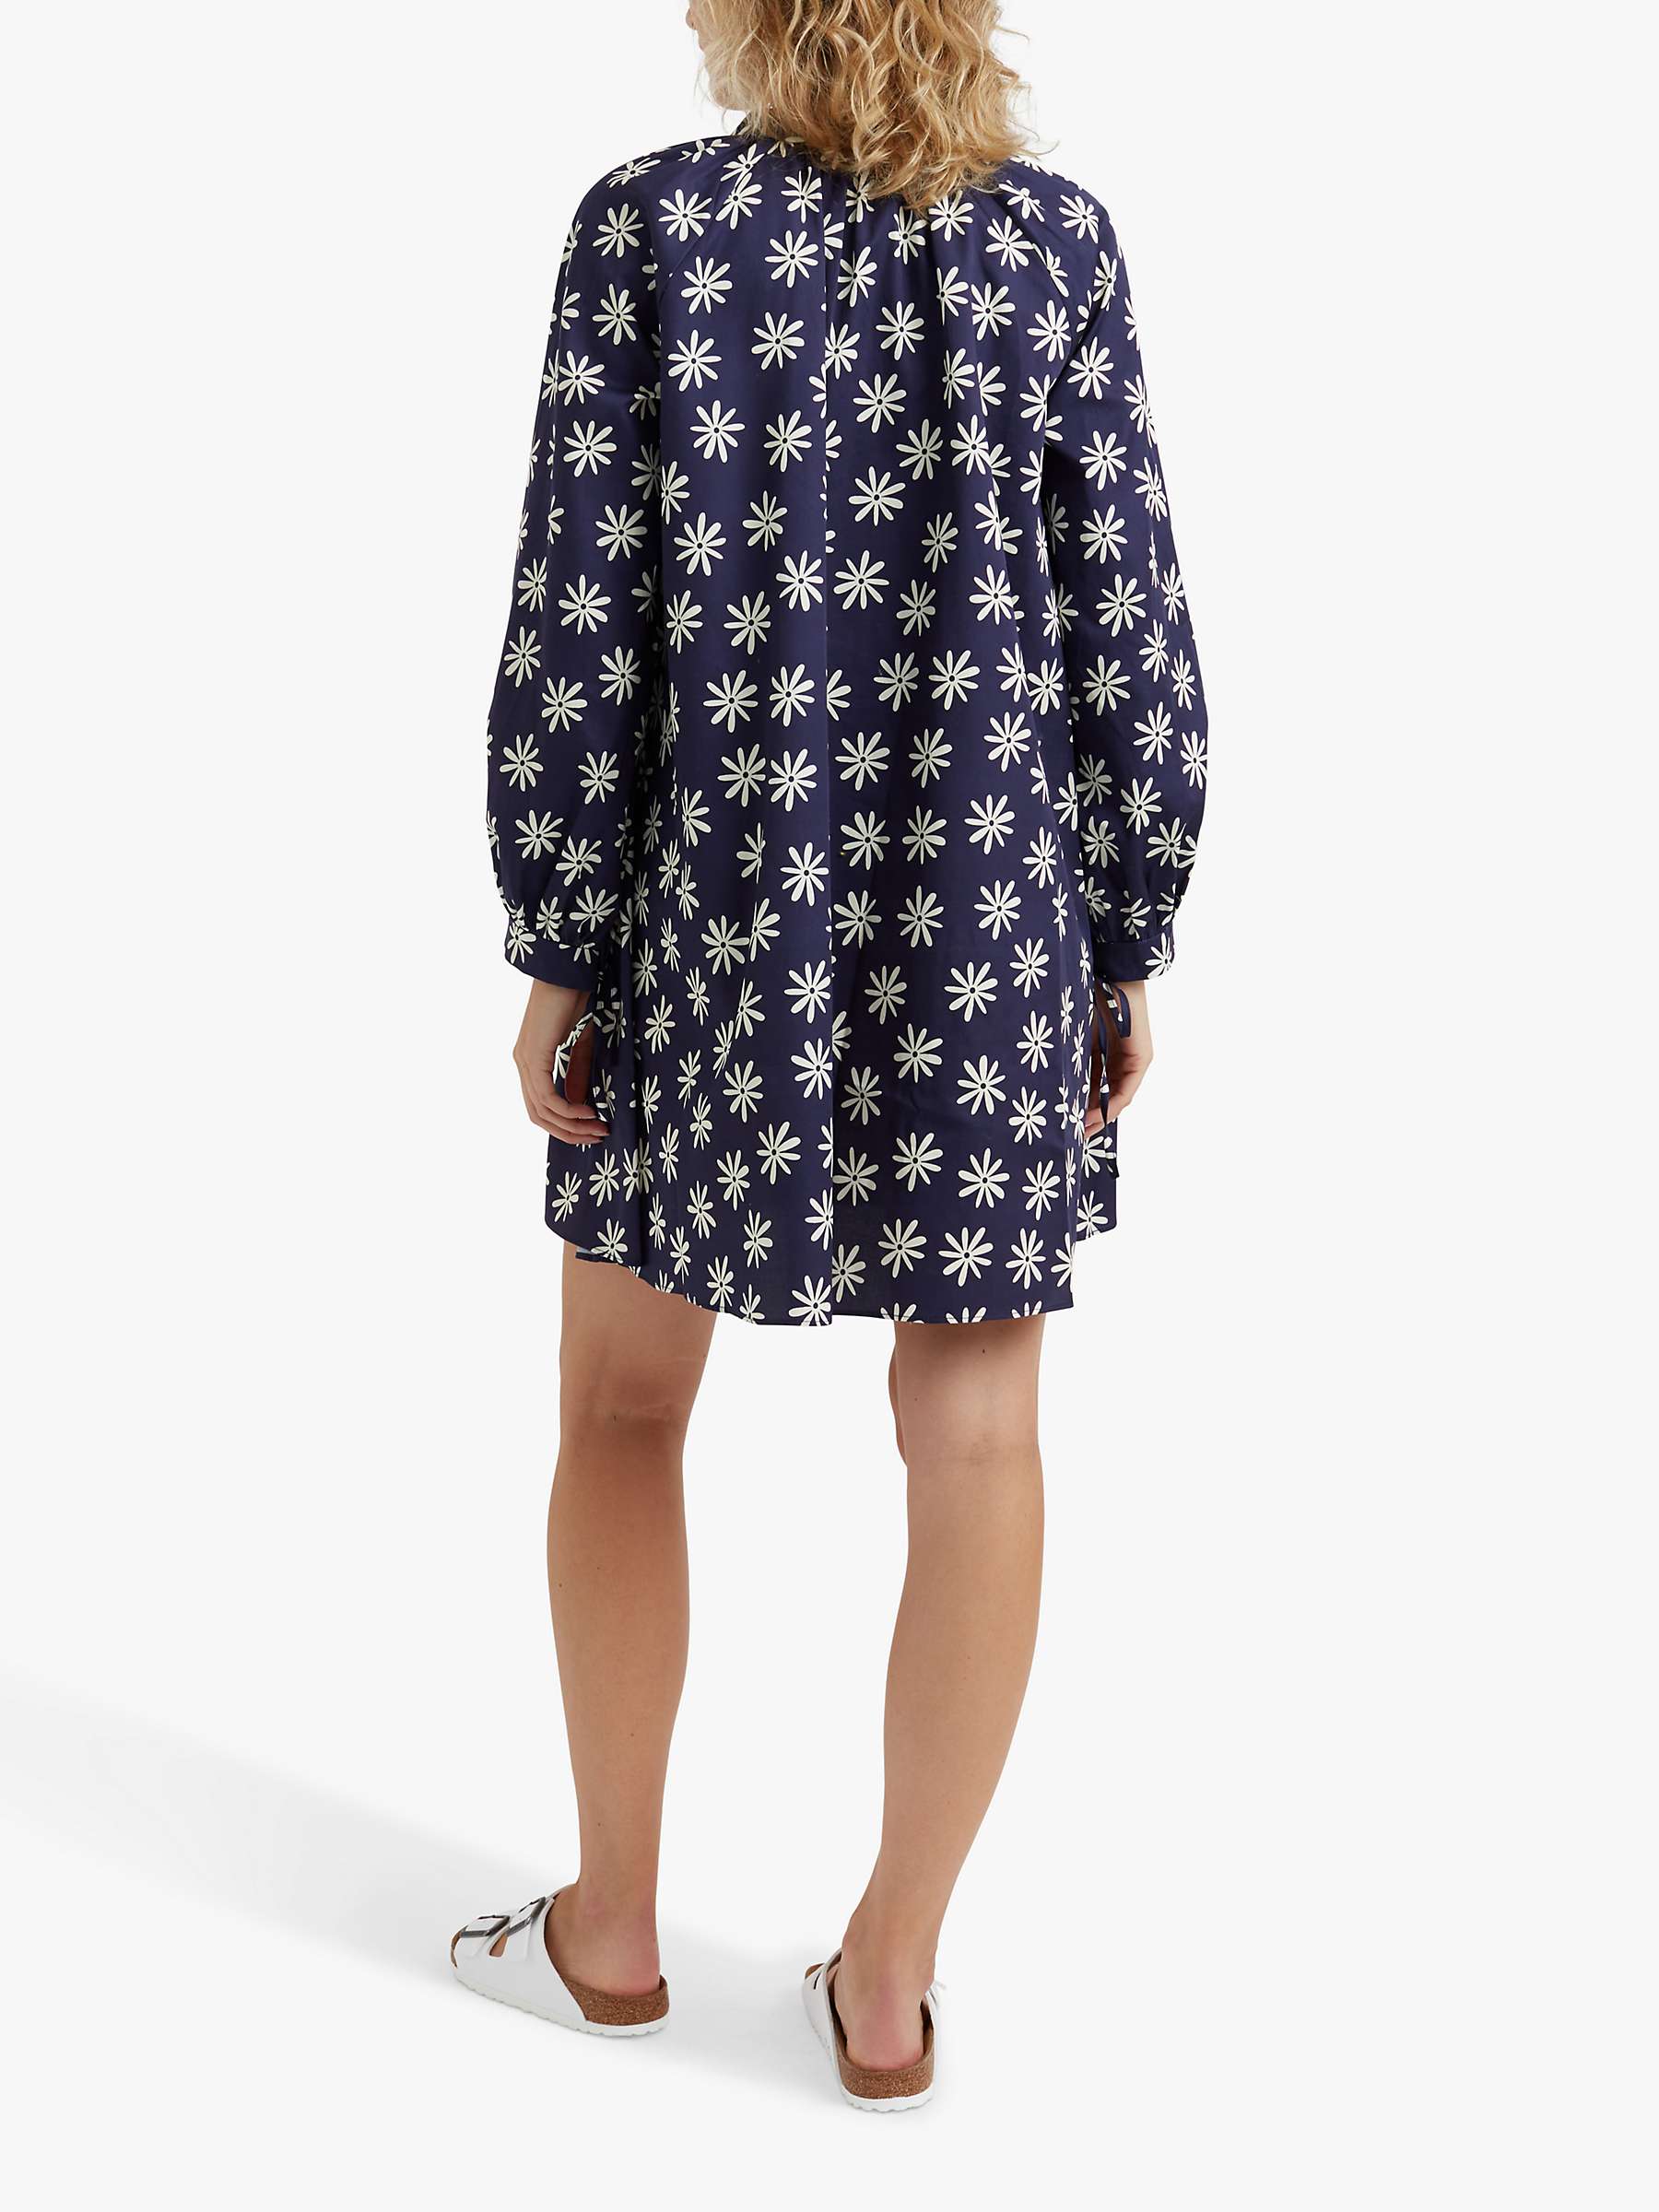 Buy Chinti & Parker Ditsy Floral Shift Dress, Navy/Cream Online at johnlewis.com